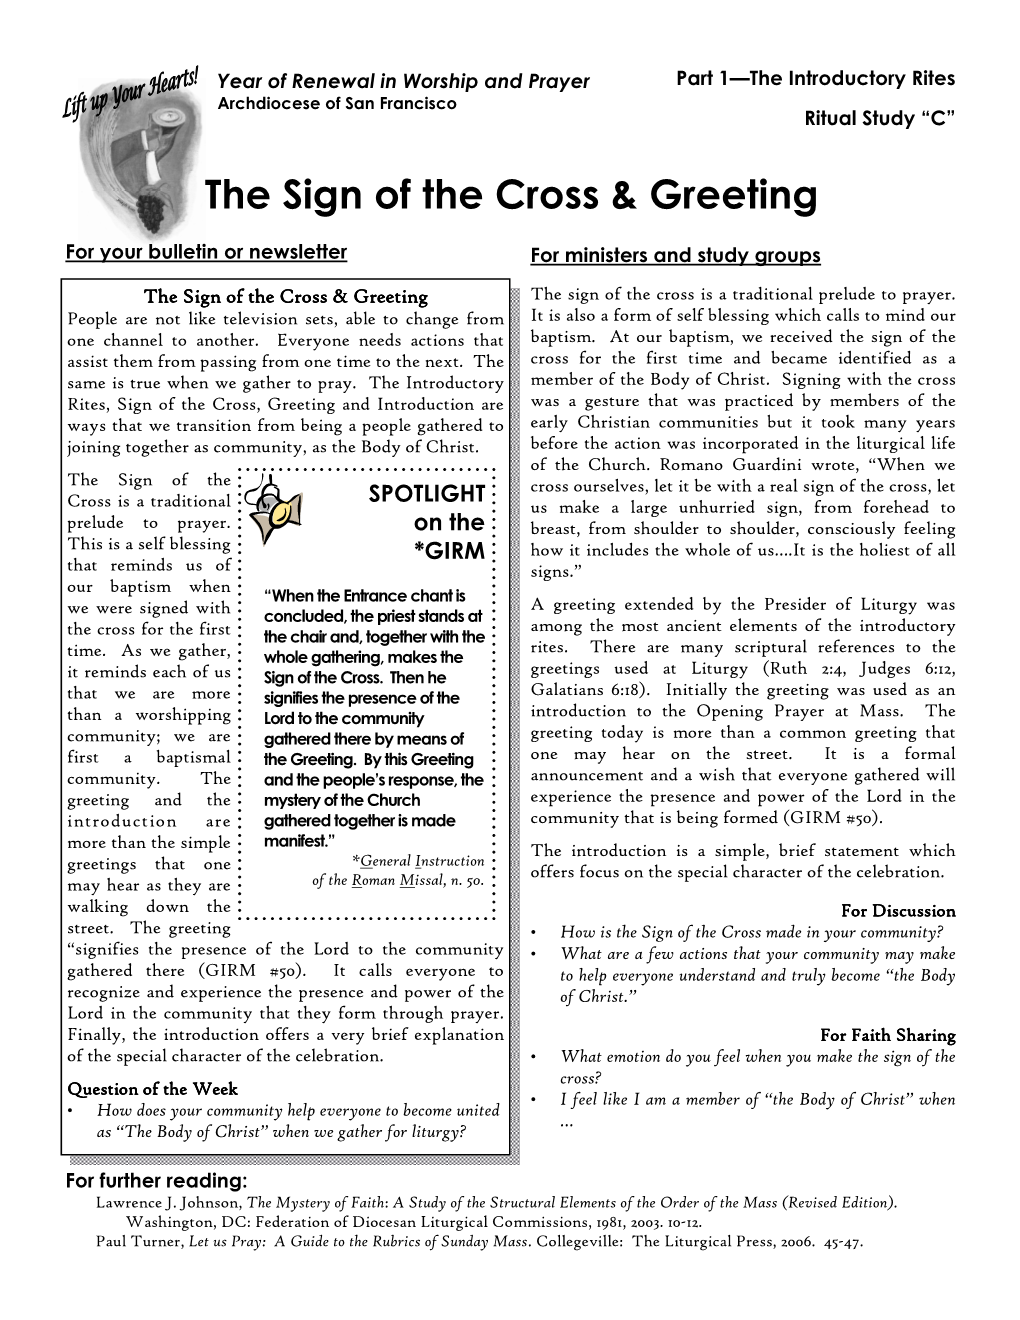 The Sign of the Cross & Greeting